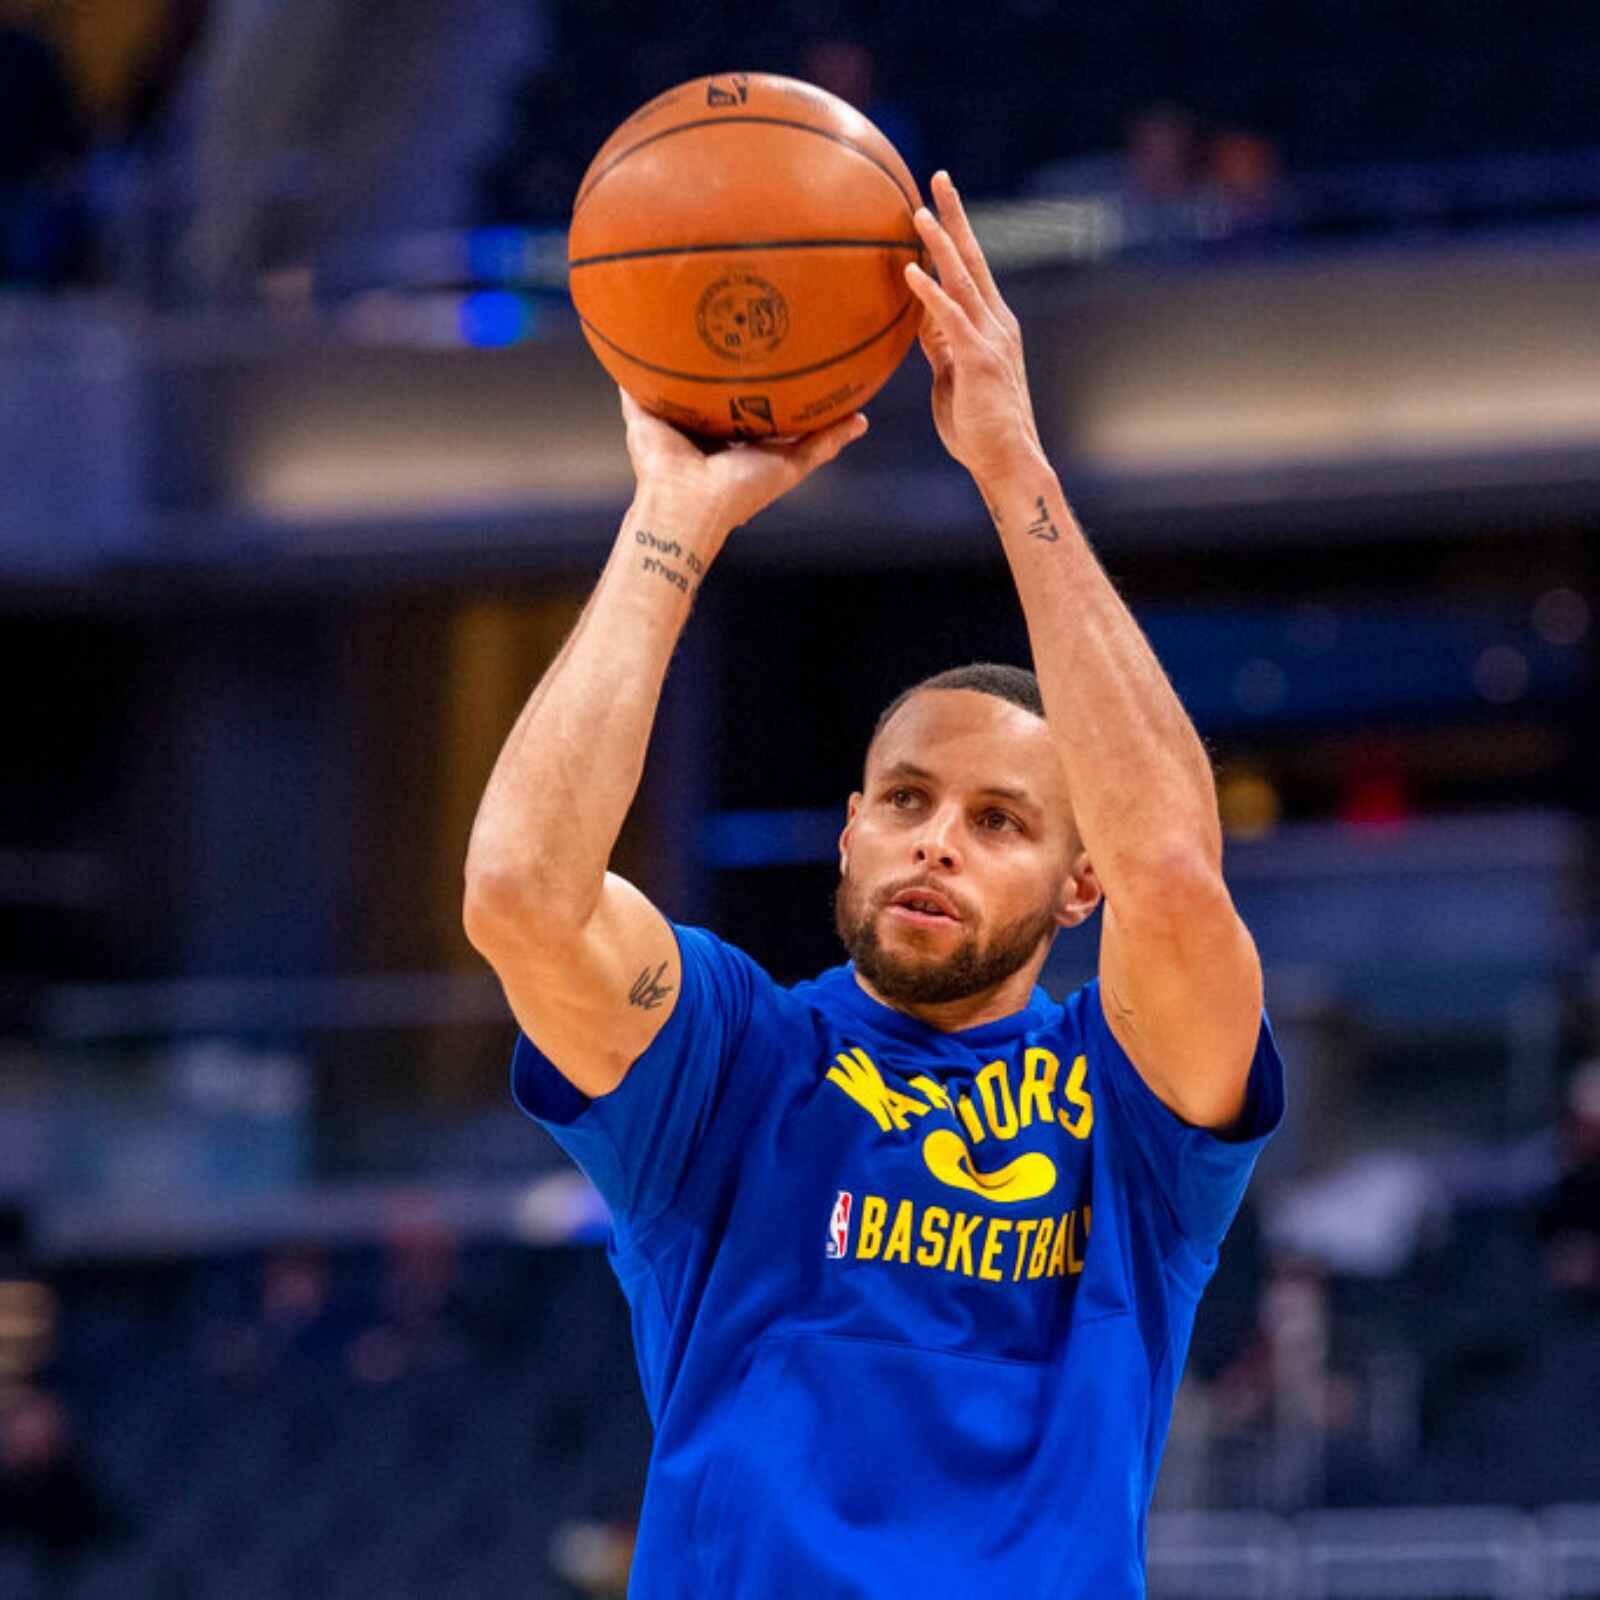 Stephen Curry breaks Ray Allen's all-time 3-point record at 